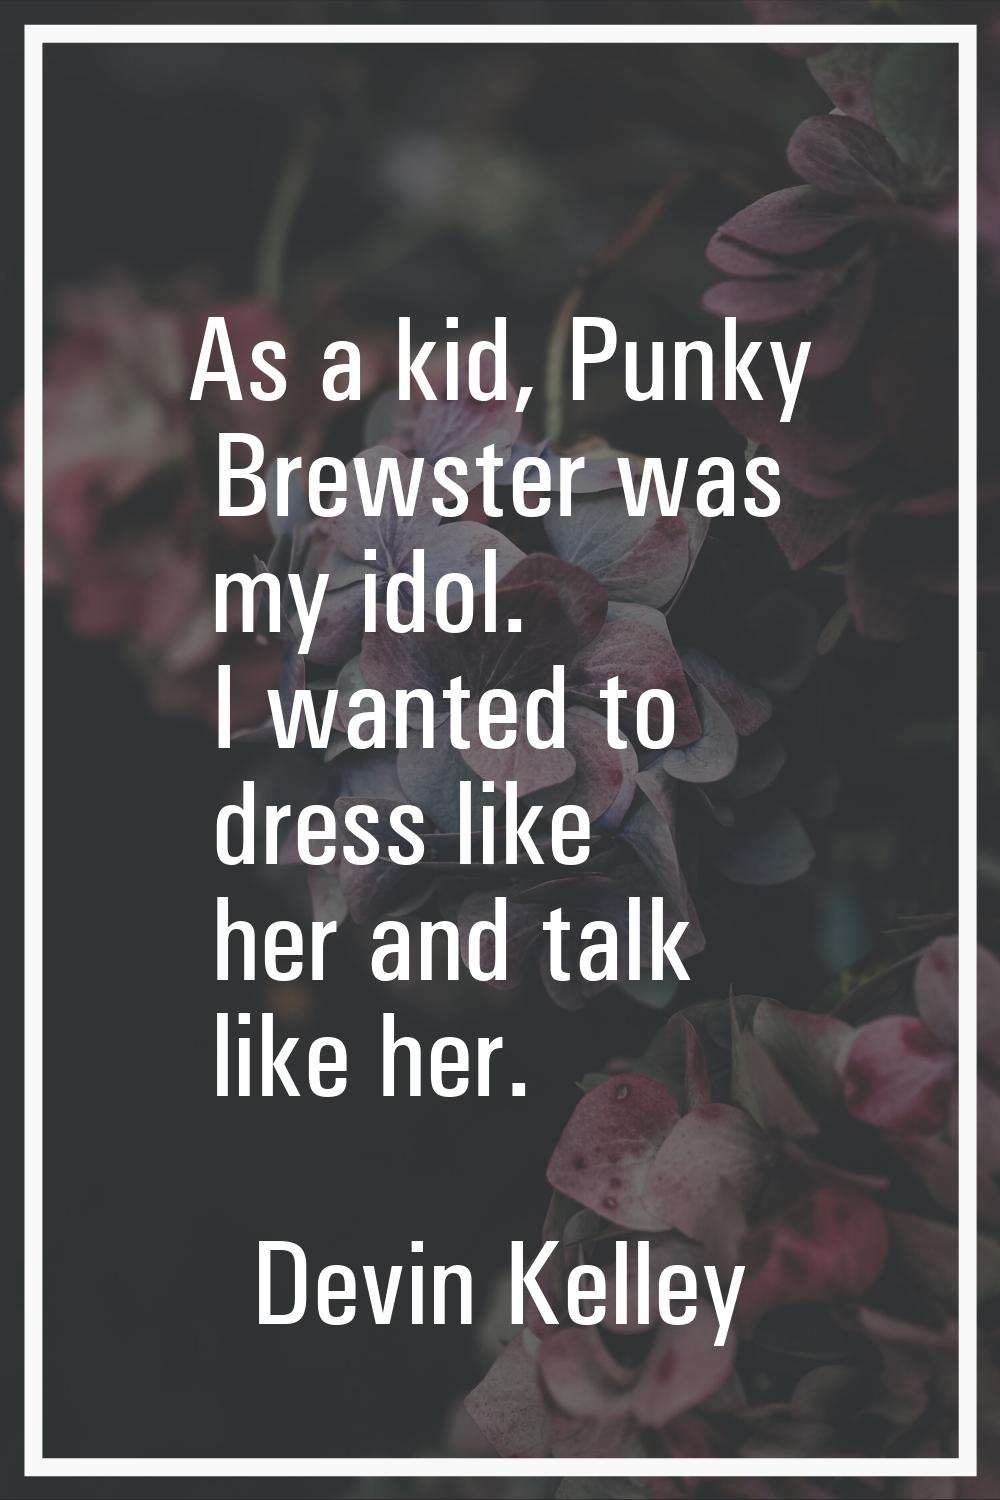 As a kid, Punky Brewster was my idol. I wanted to dress like her and talk like her.